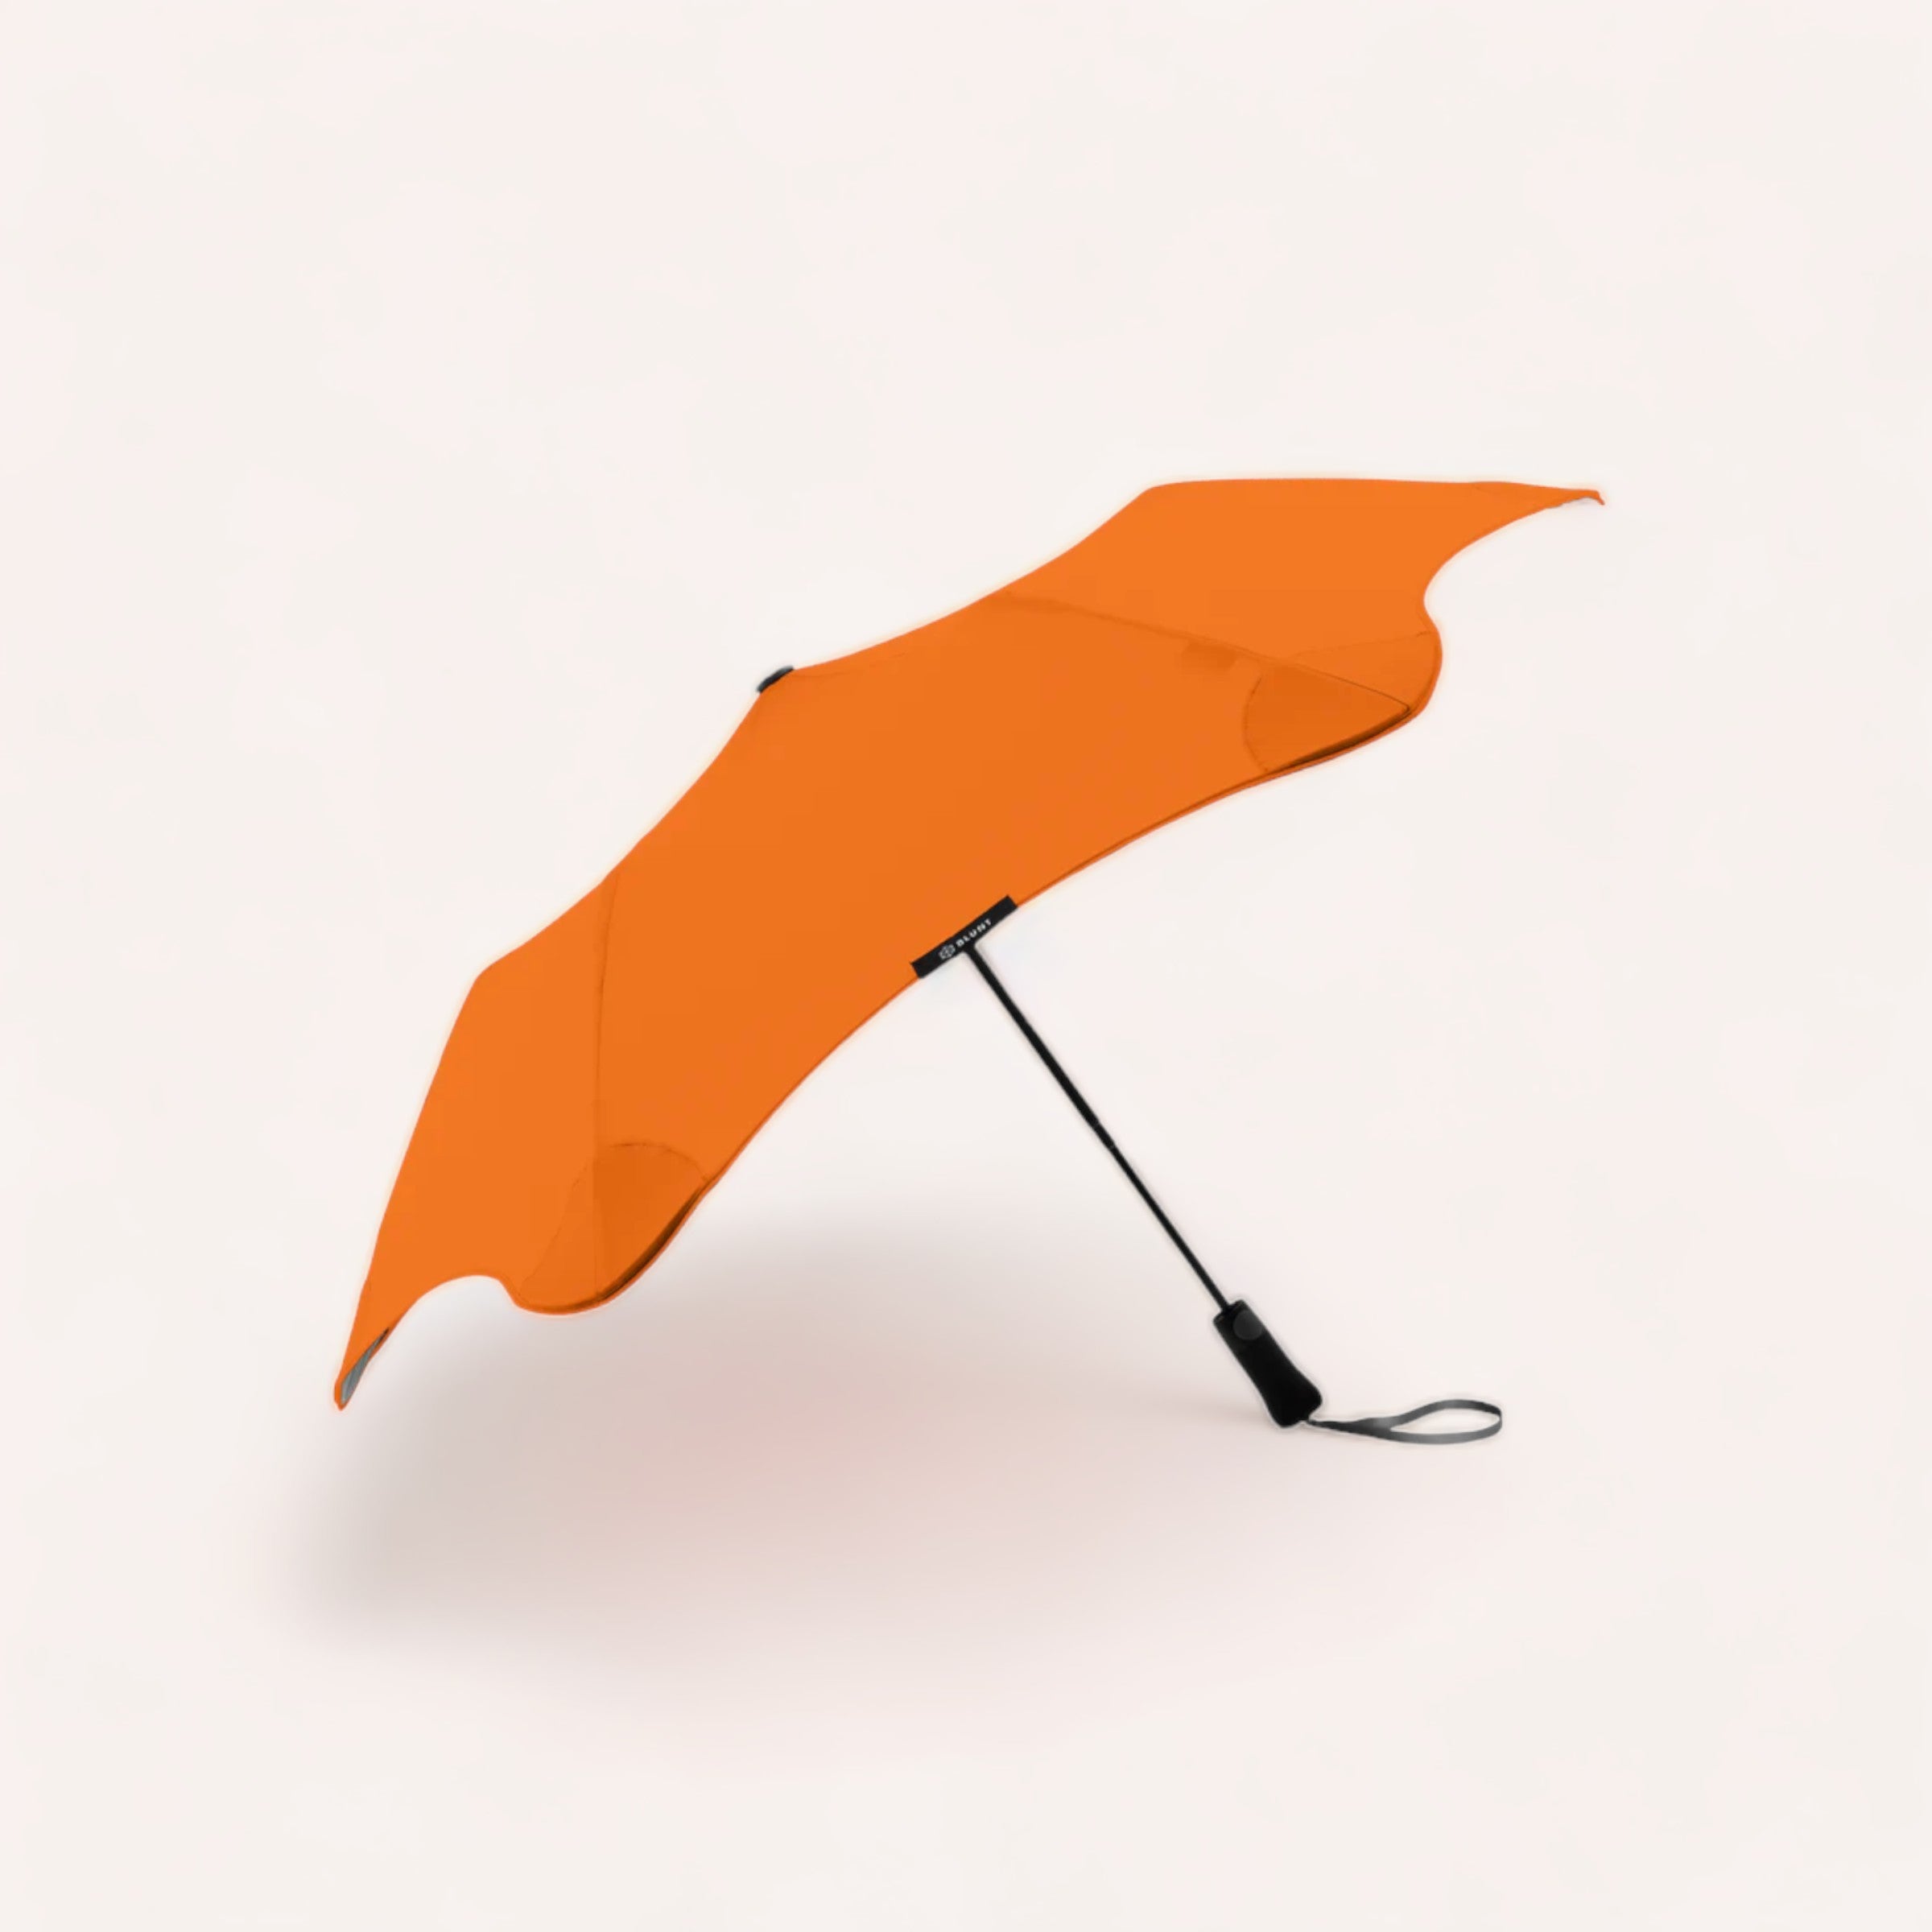 A vibrant orange BLUNT Metro umbrella with an auto-open canopy, open and resting sideways against a white background.